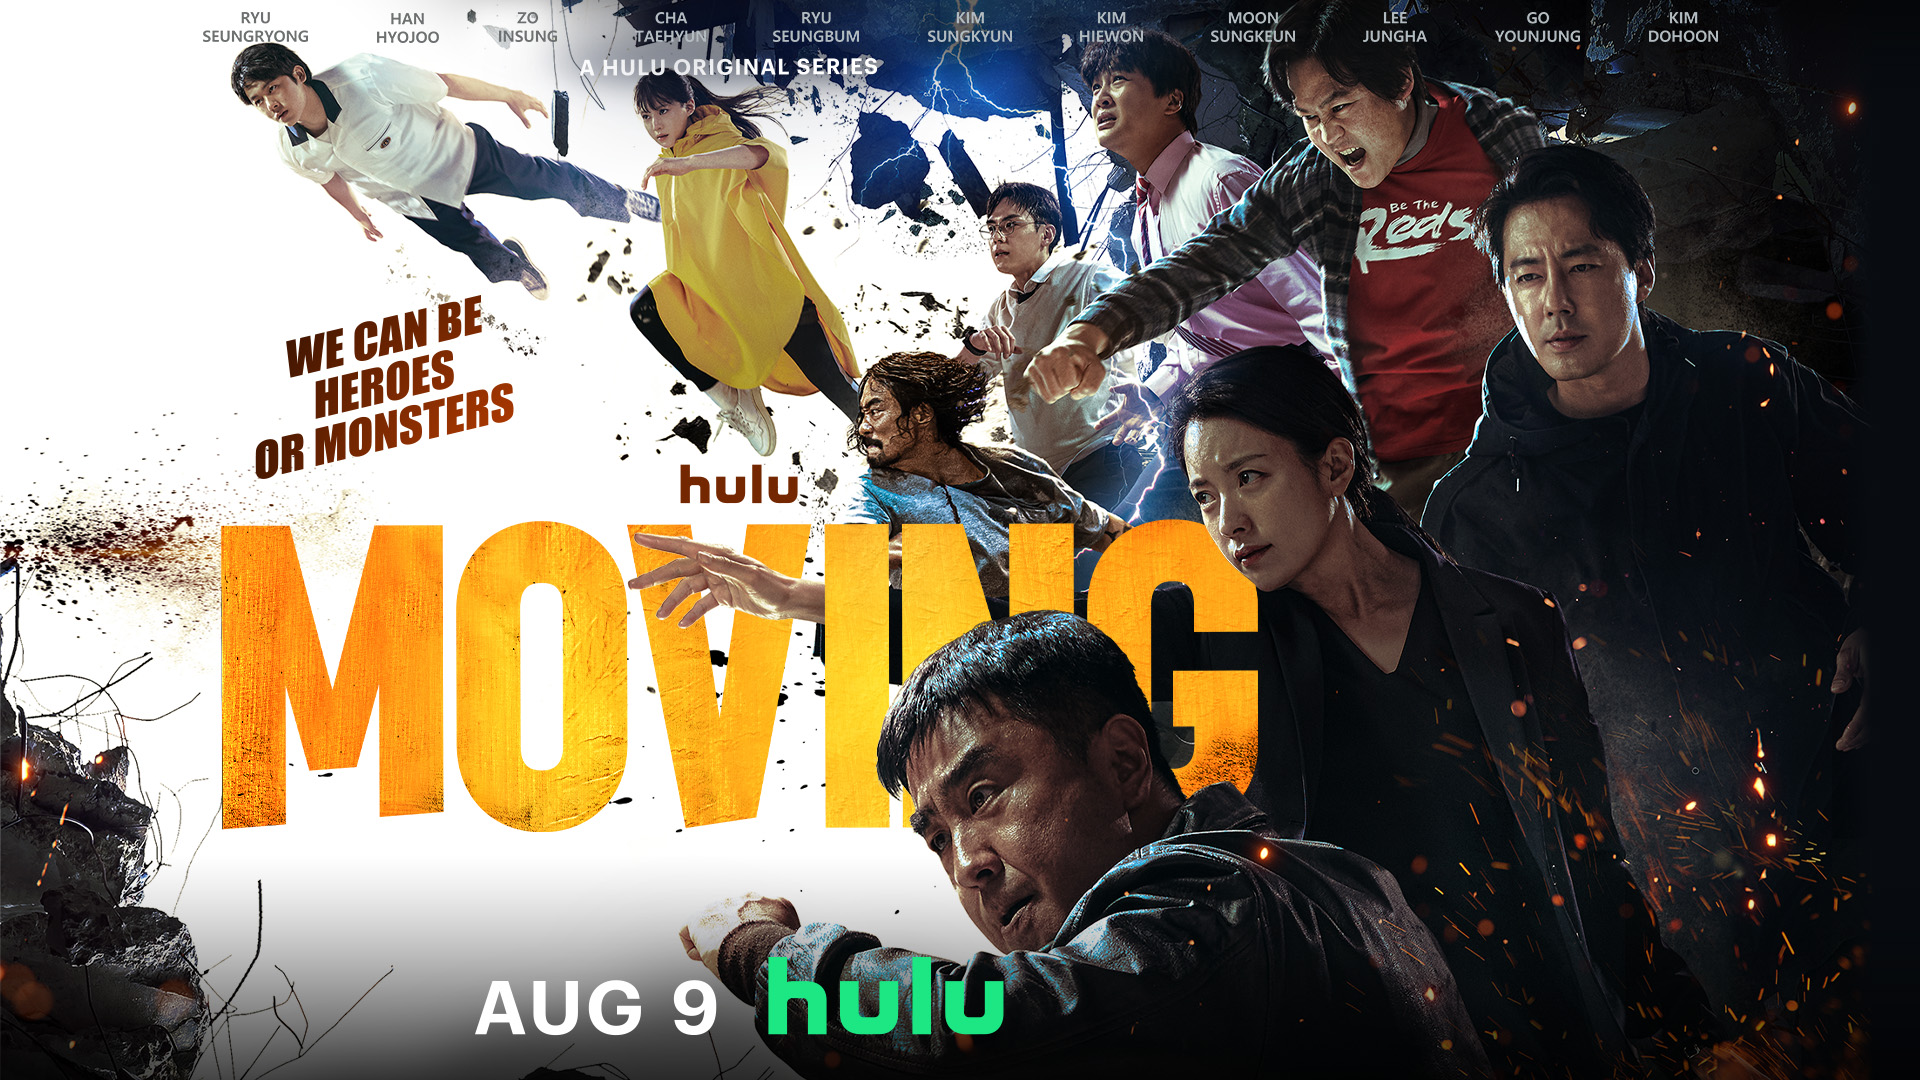 Moving Drama Review